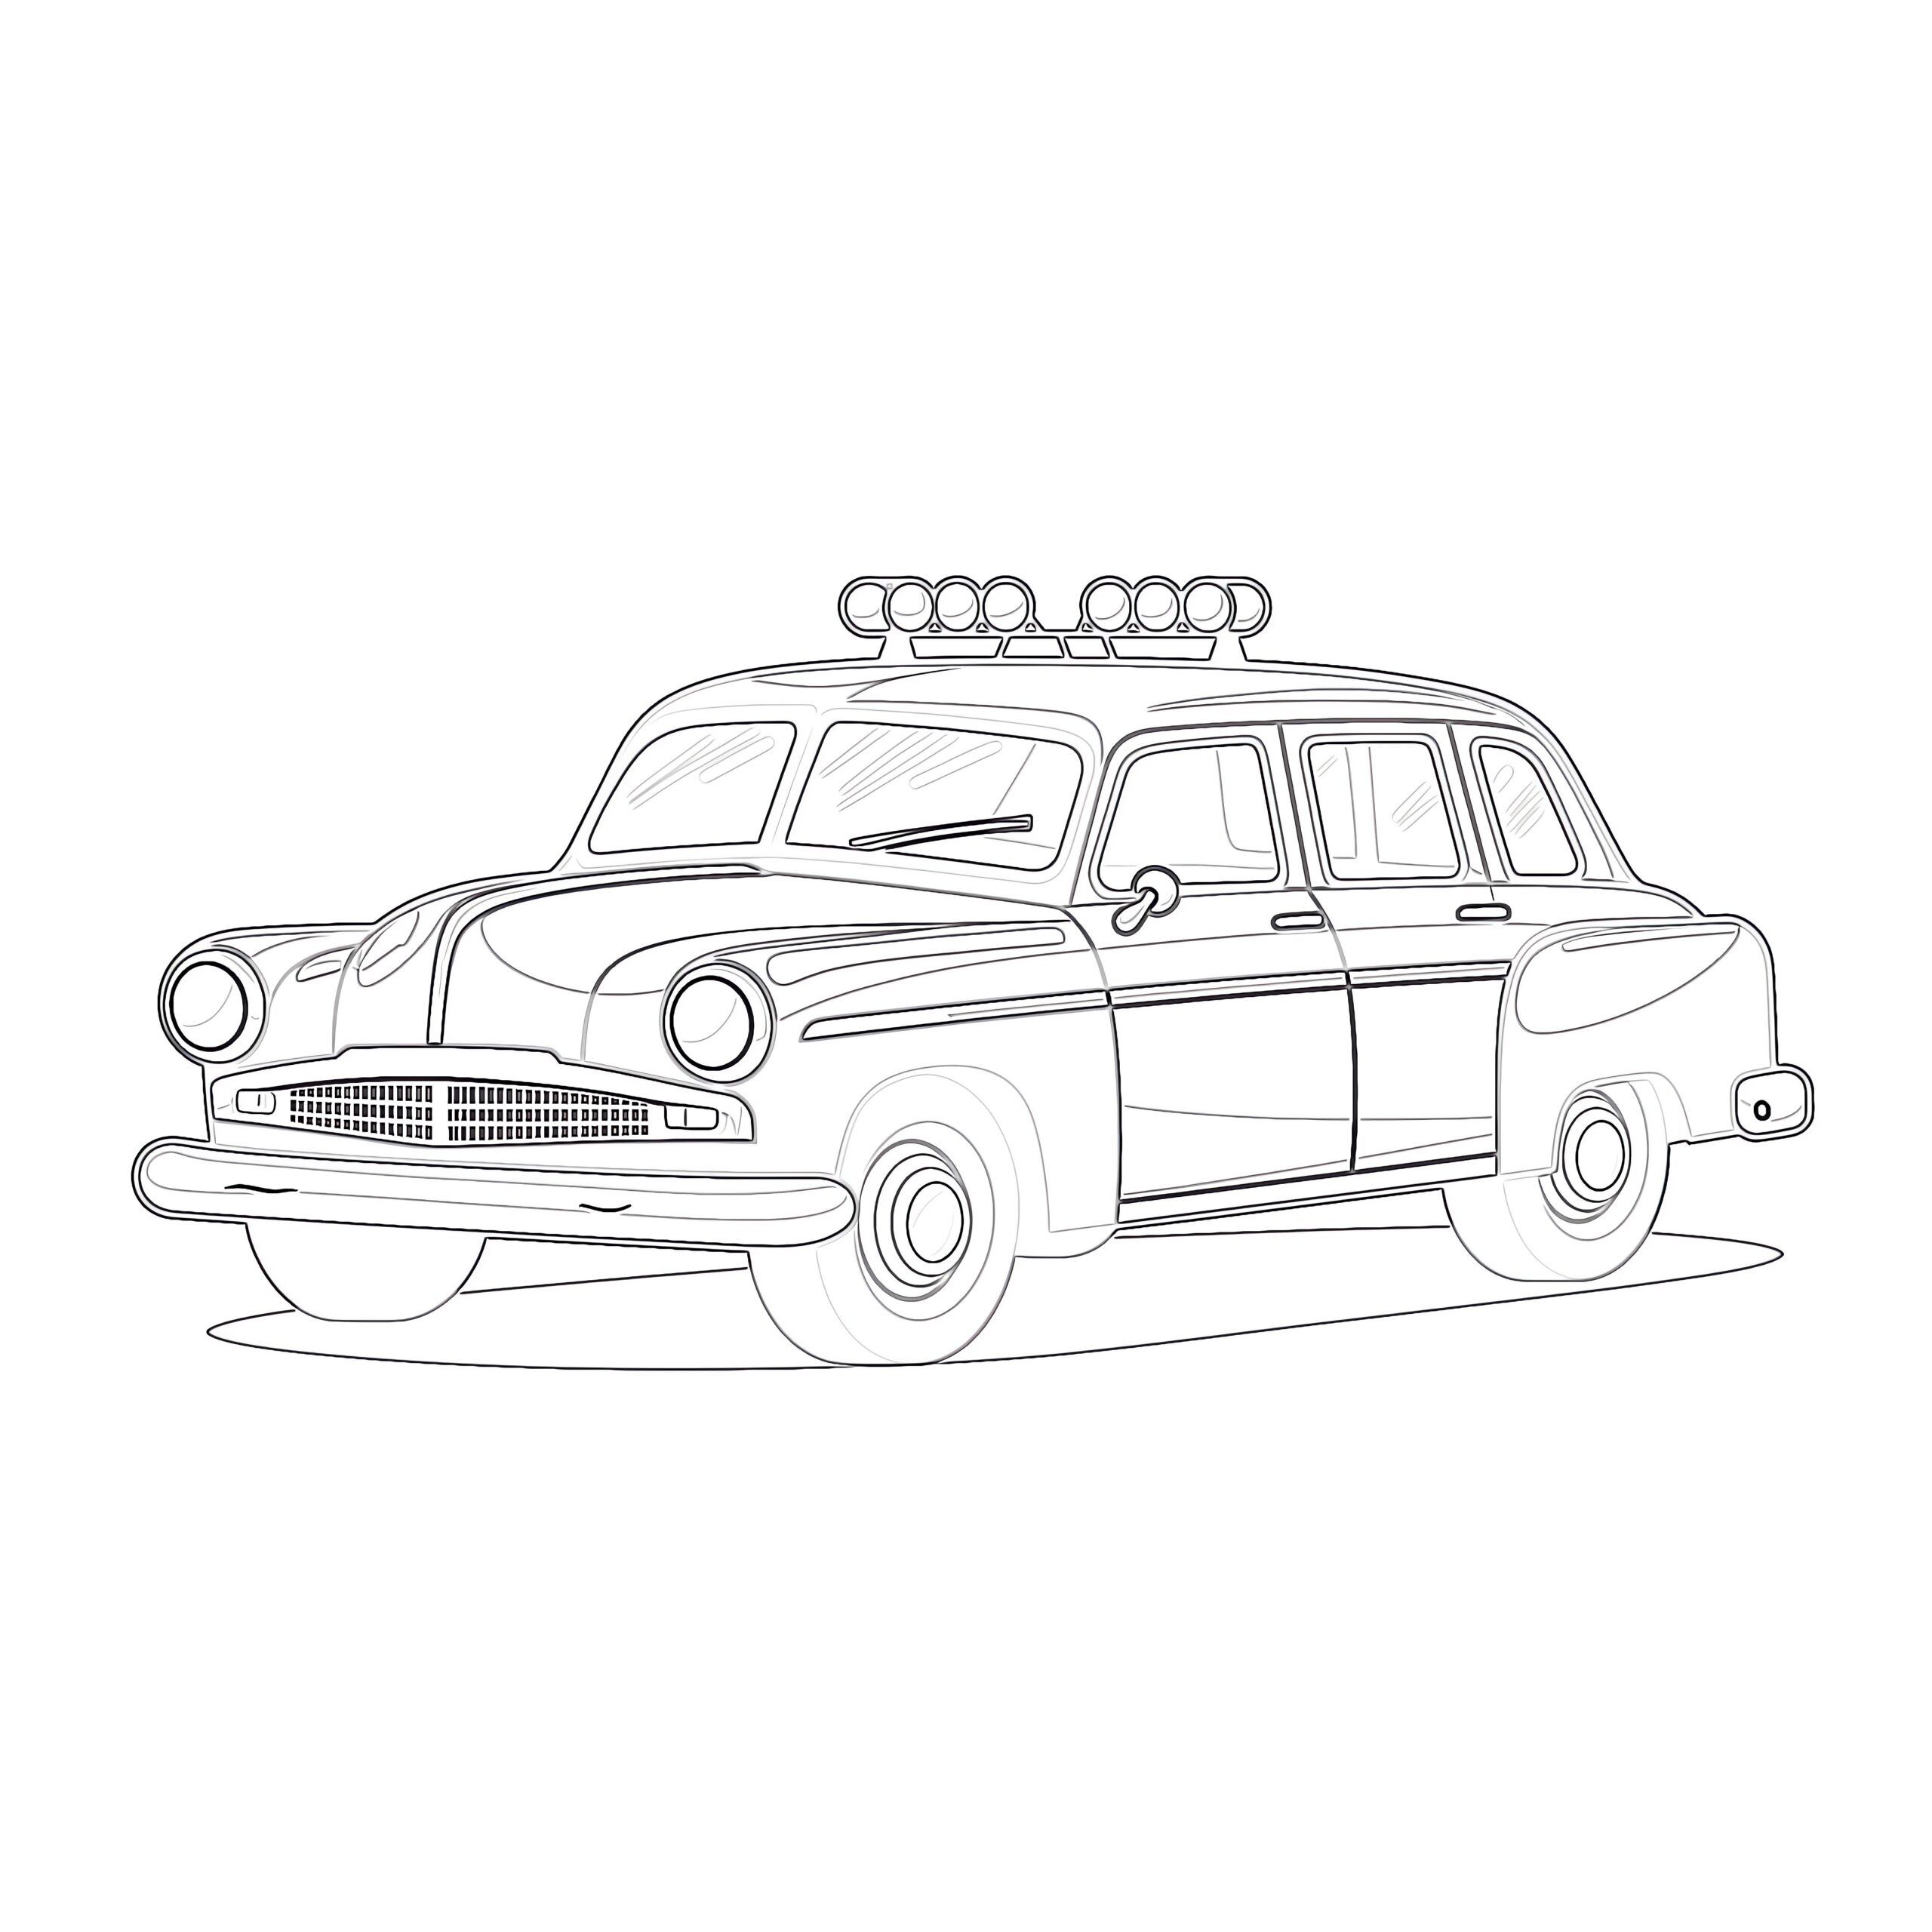 Printable police car coloring page